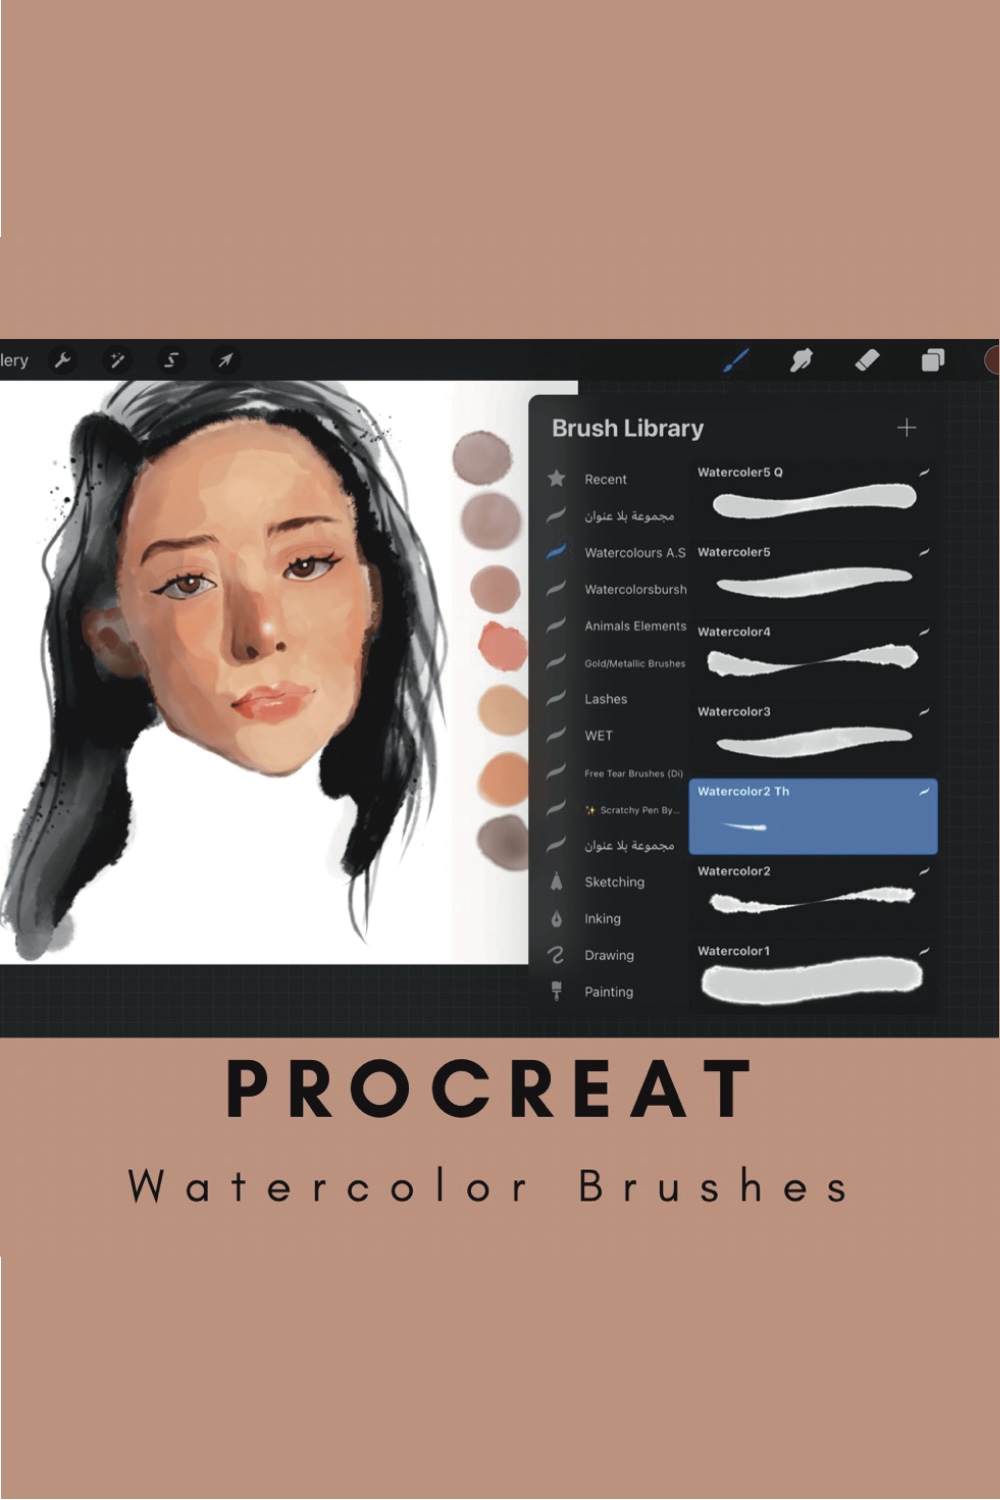 Procreate Watercolor Brushes - pinterest image preview.